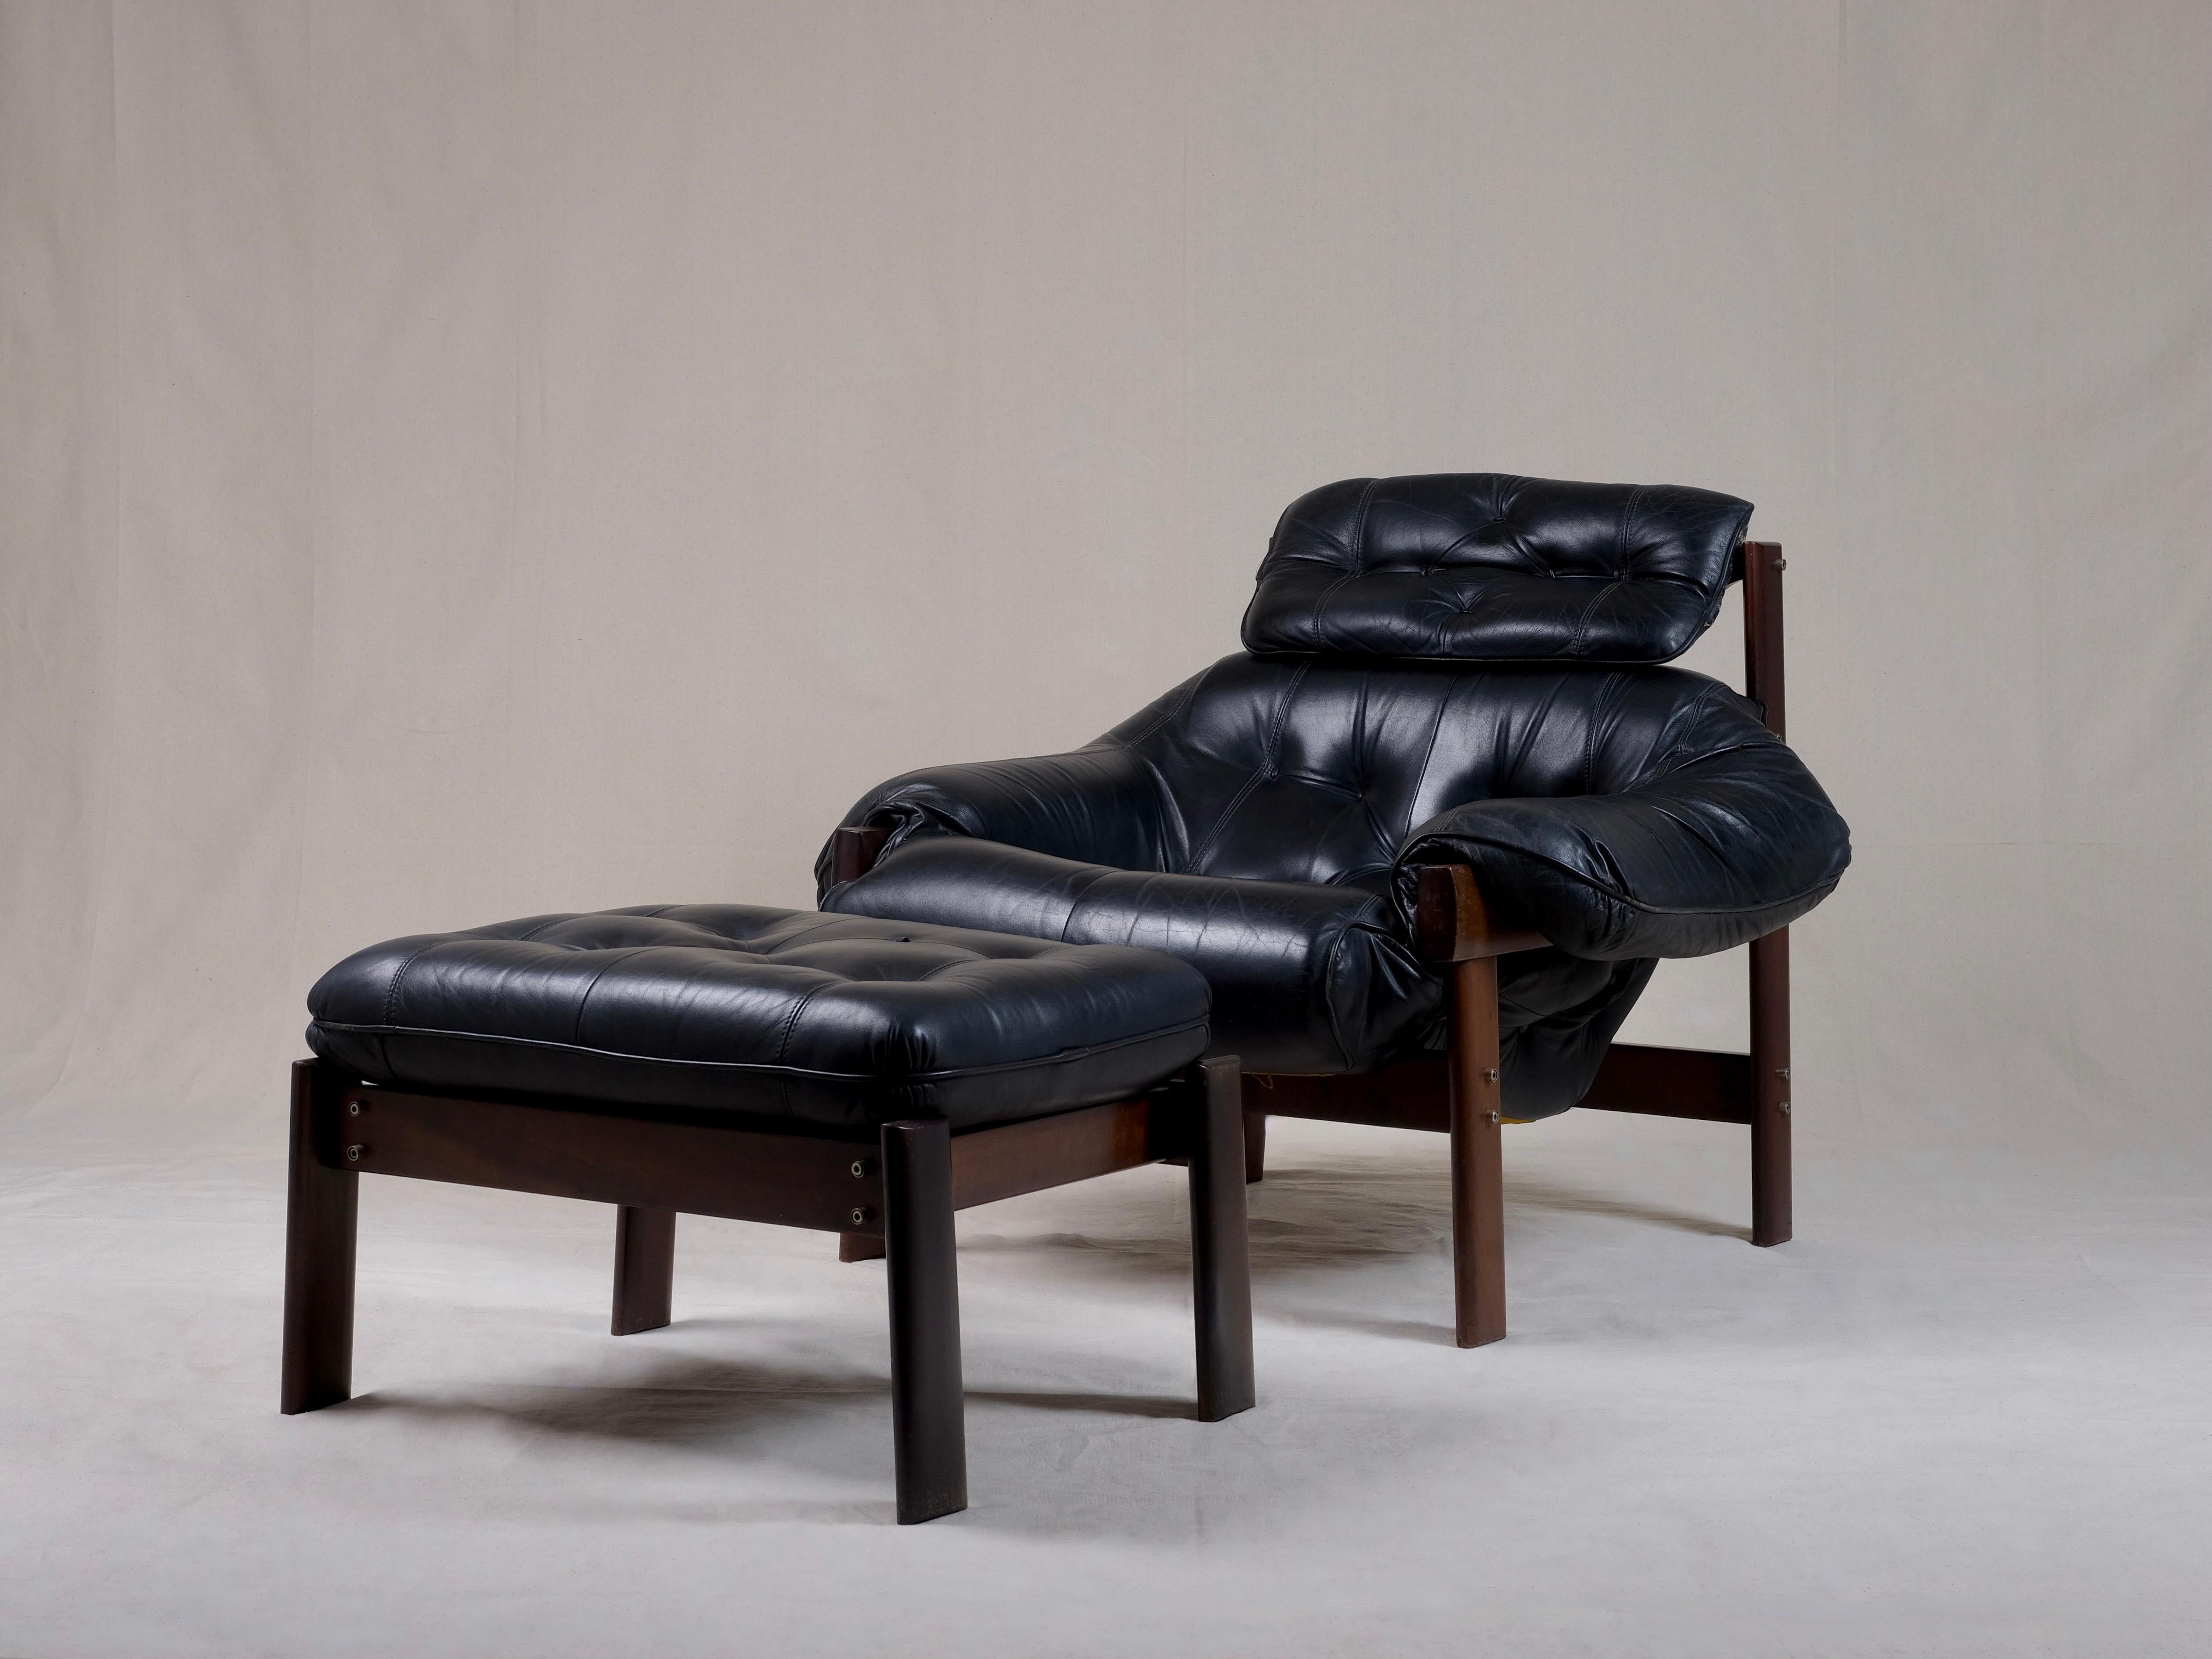 The MP-41 was designed by Percival Lafer in the 1960’s, Brazil.

 This chair features a solid dark hardwood base with leather straps to support the seat. The tufted leather seating is placed on top of the leather straps and the wooden frame, which